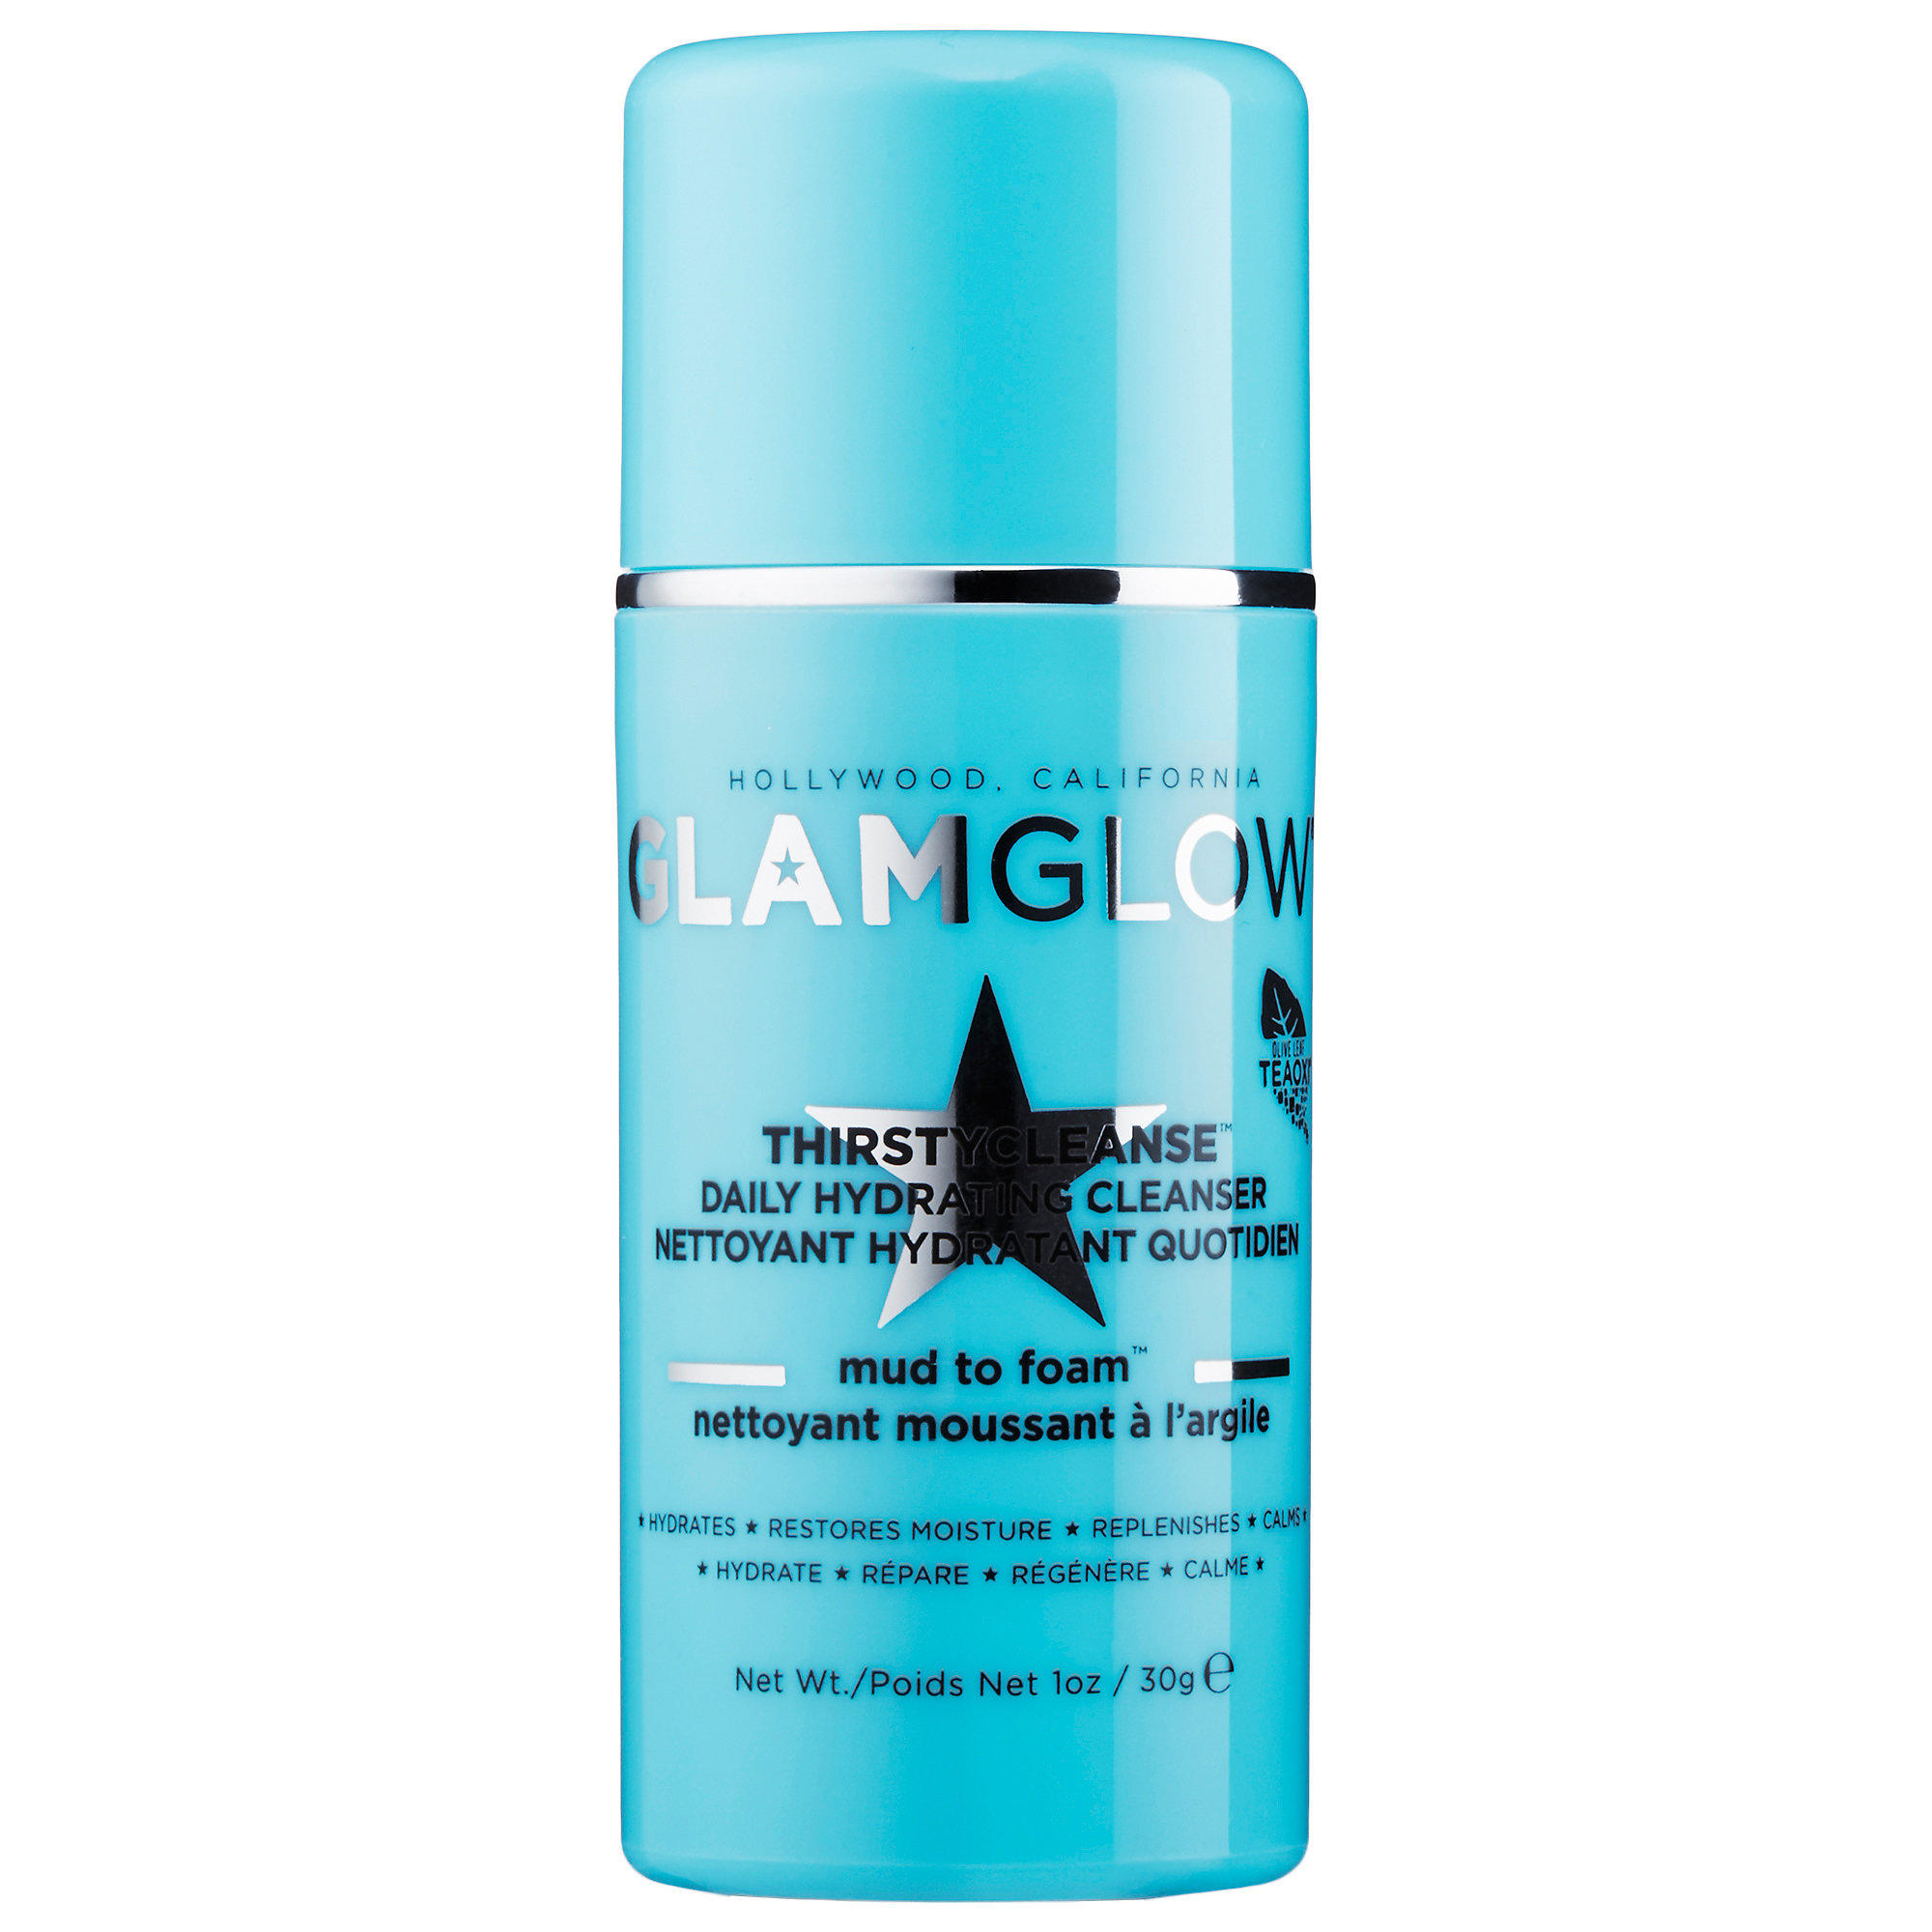 Glamglow Thirstycleanse Daily Treatment Cleanser Mud To Foam 30g